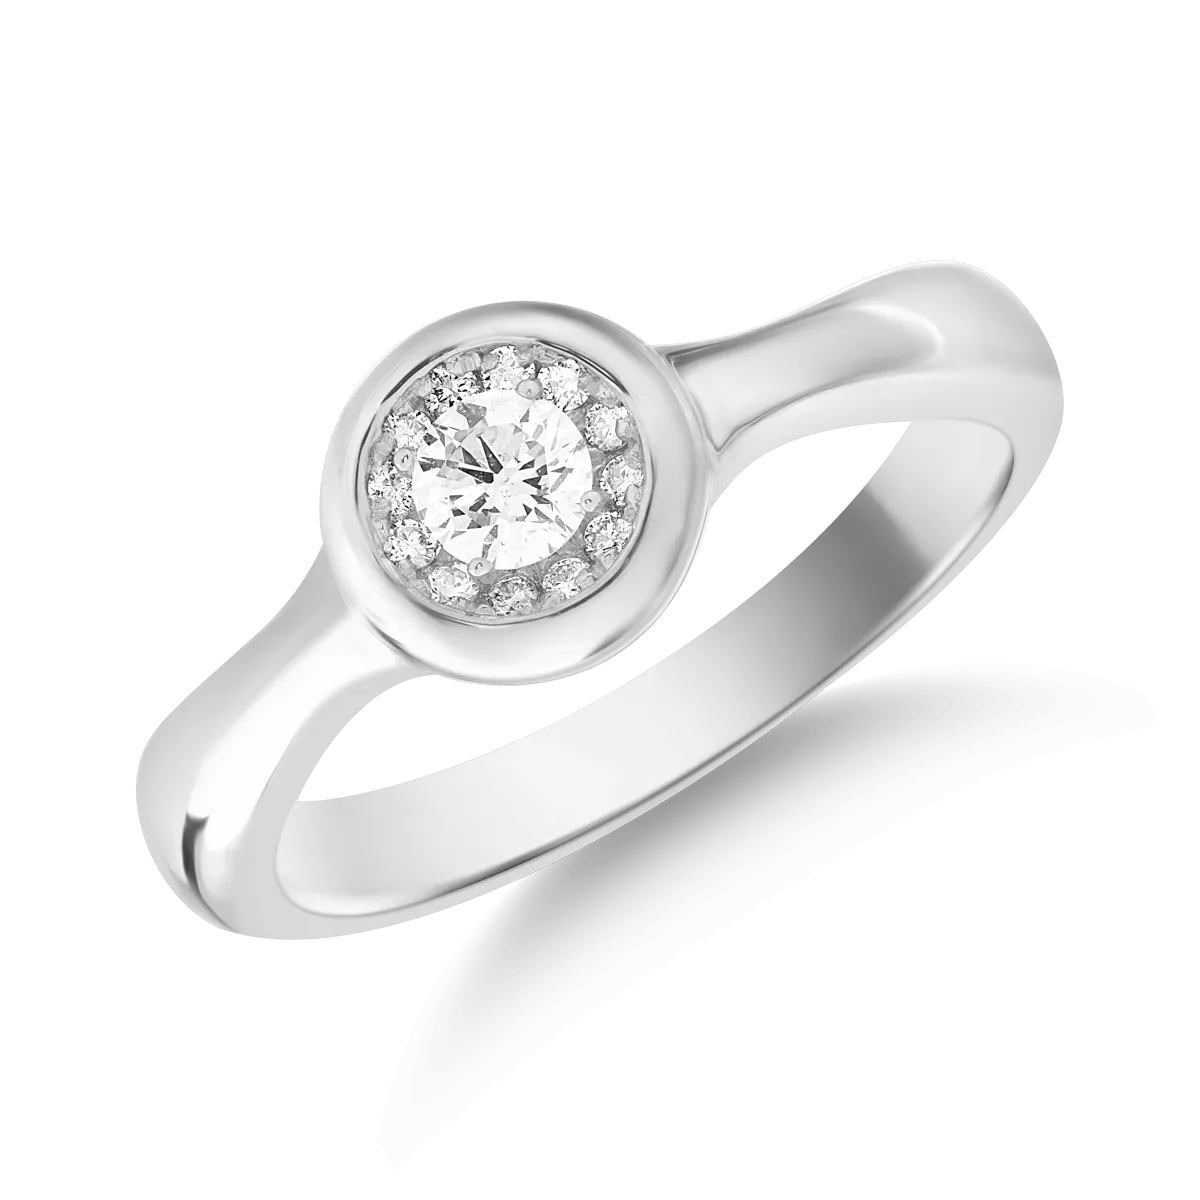 18K white gold ring with 0.05ct diamond and 0.03ct diamonds